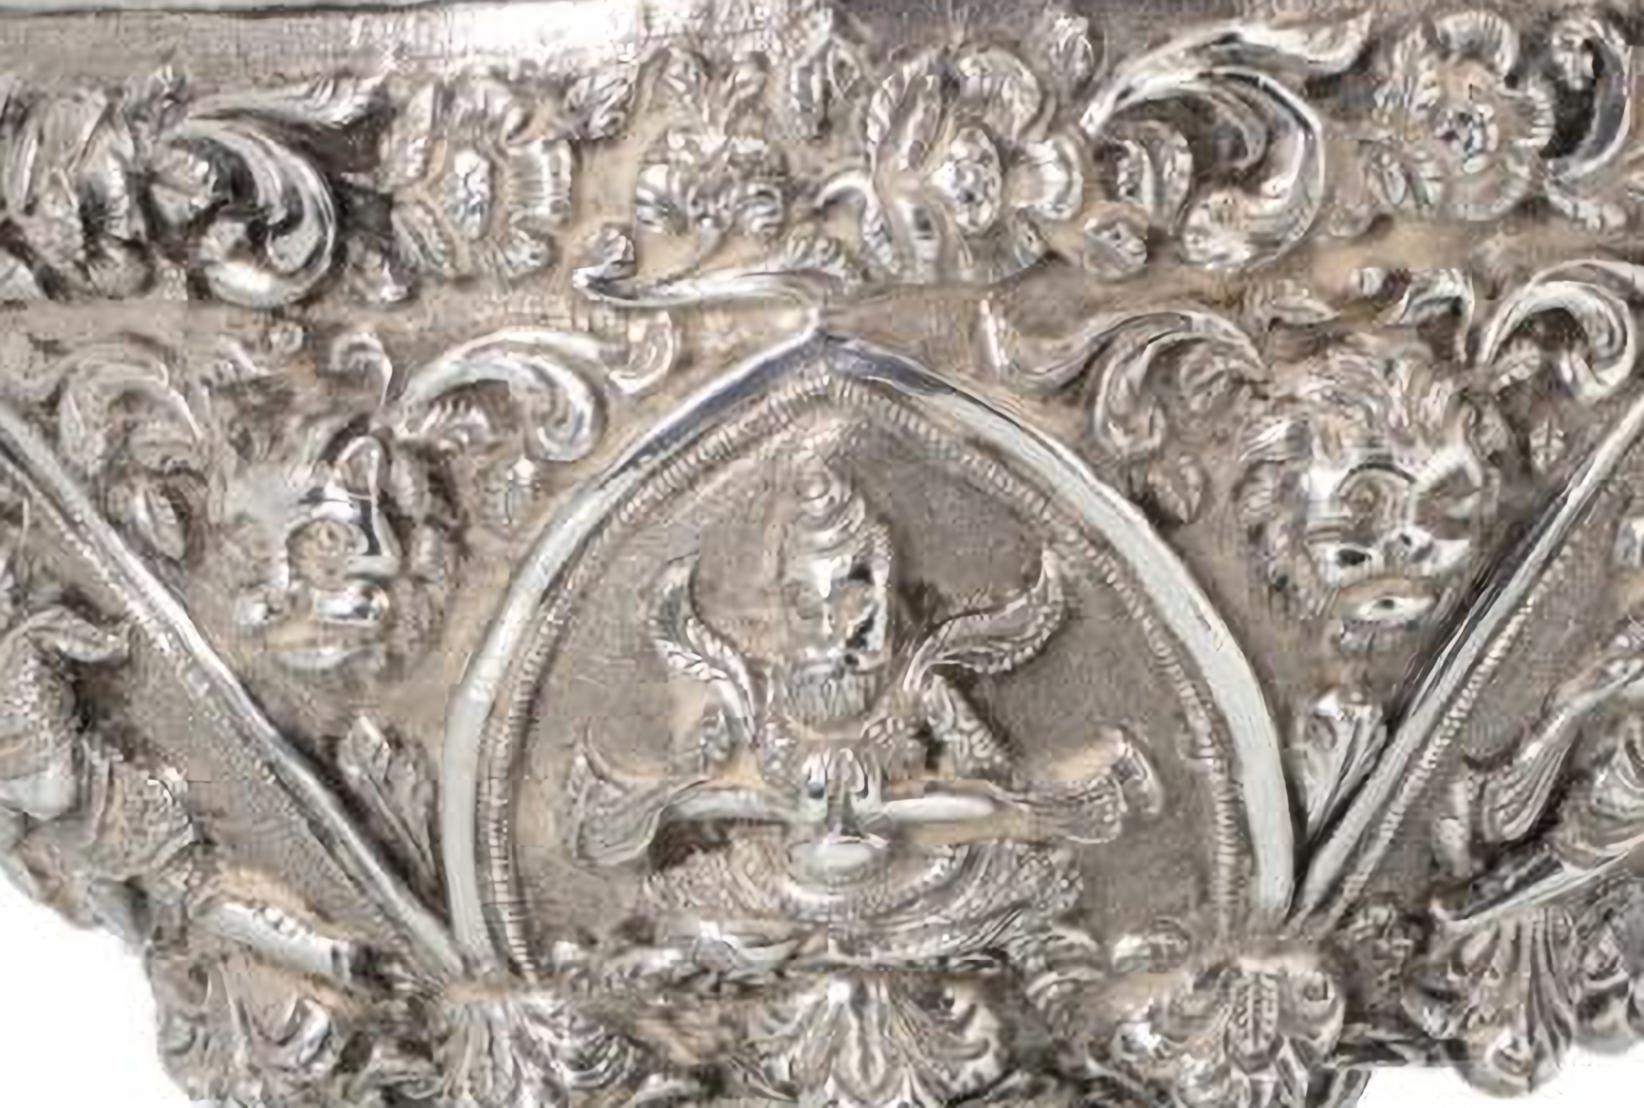 RARE SILVER BOWL
Middle East 19th Century
Ceremony Cup
Maybe Saudi Arabia ?
with oval base foot with lion shaft with flower knot with hollow ball joining to the base of the cup.
The glass is presented with reserves with oriental images, vegetal